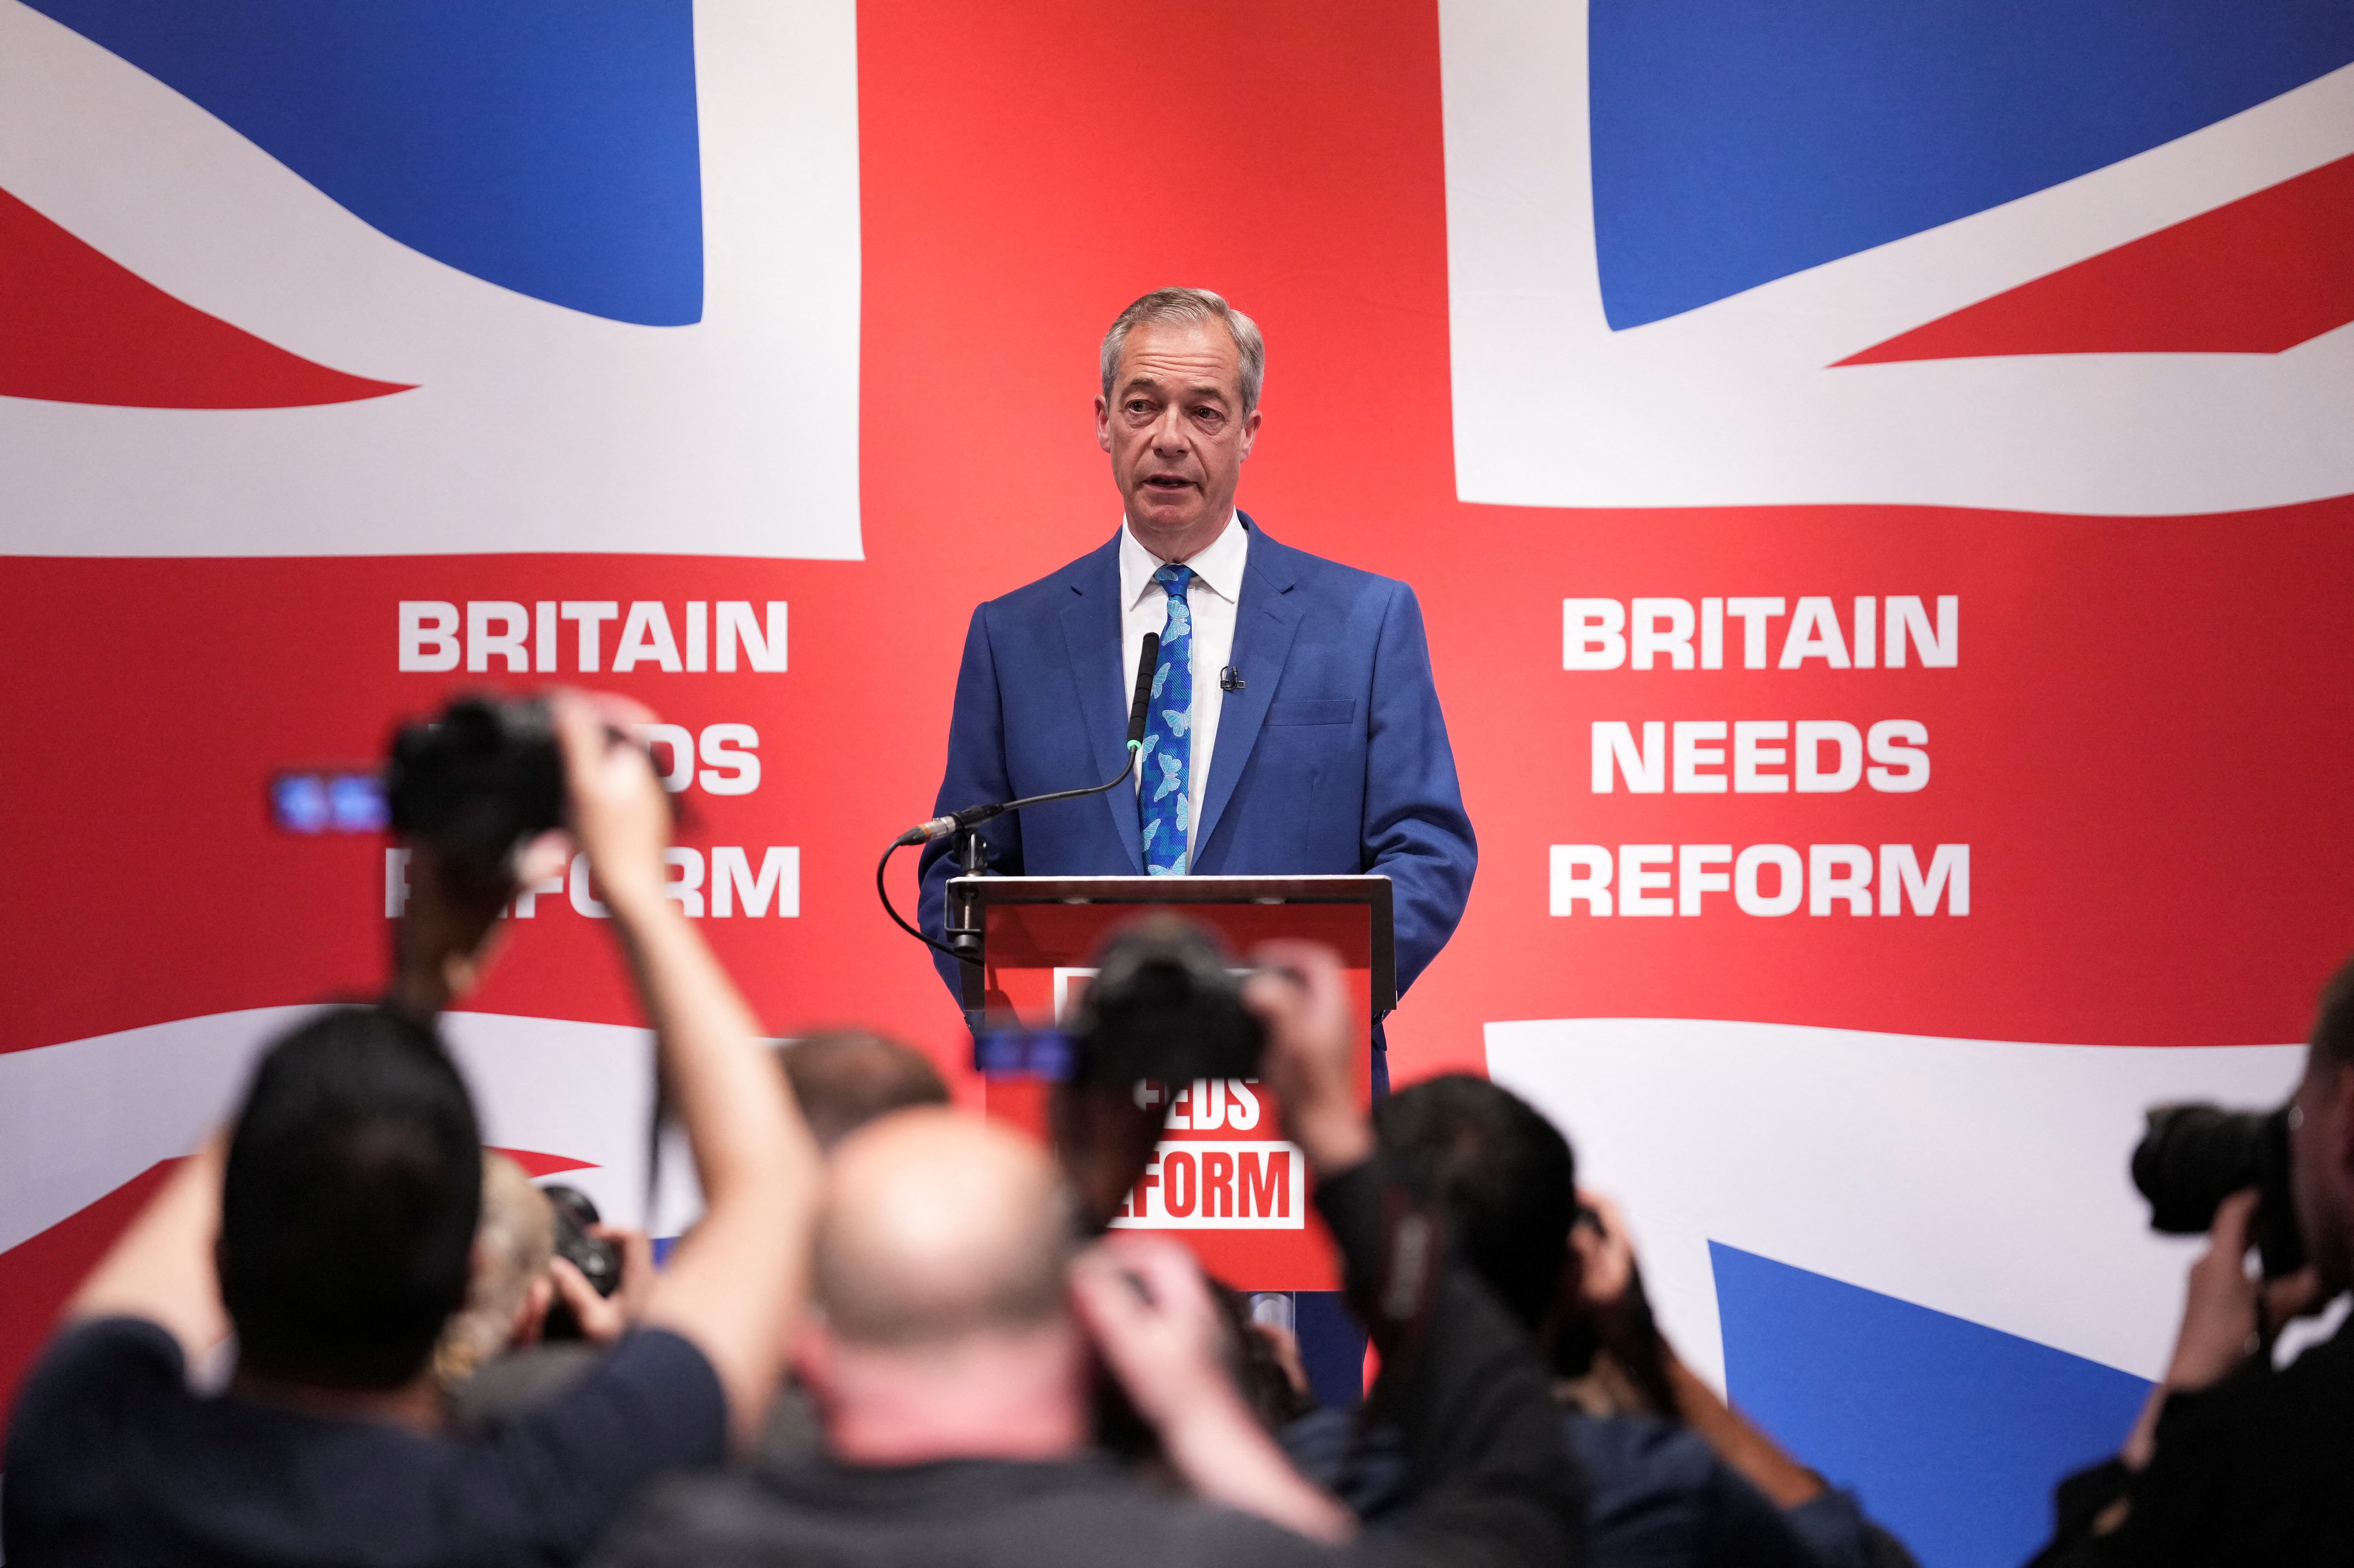 Honorary President of the Reform UK party Nigel Farage attends press conference, in London